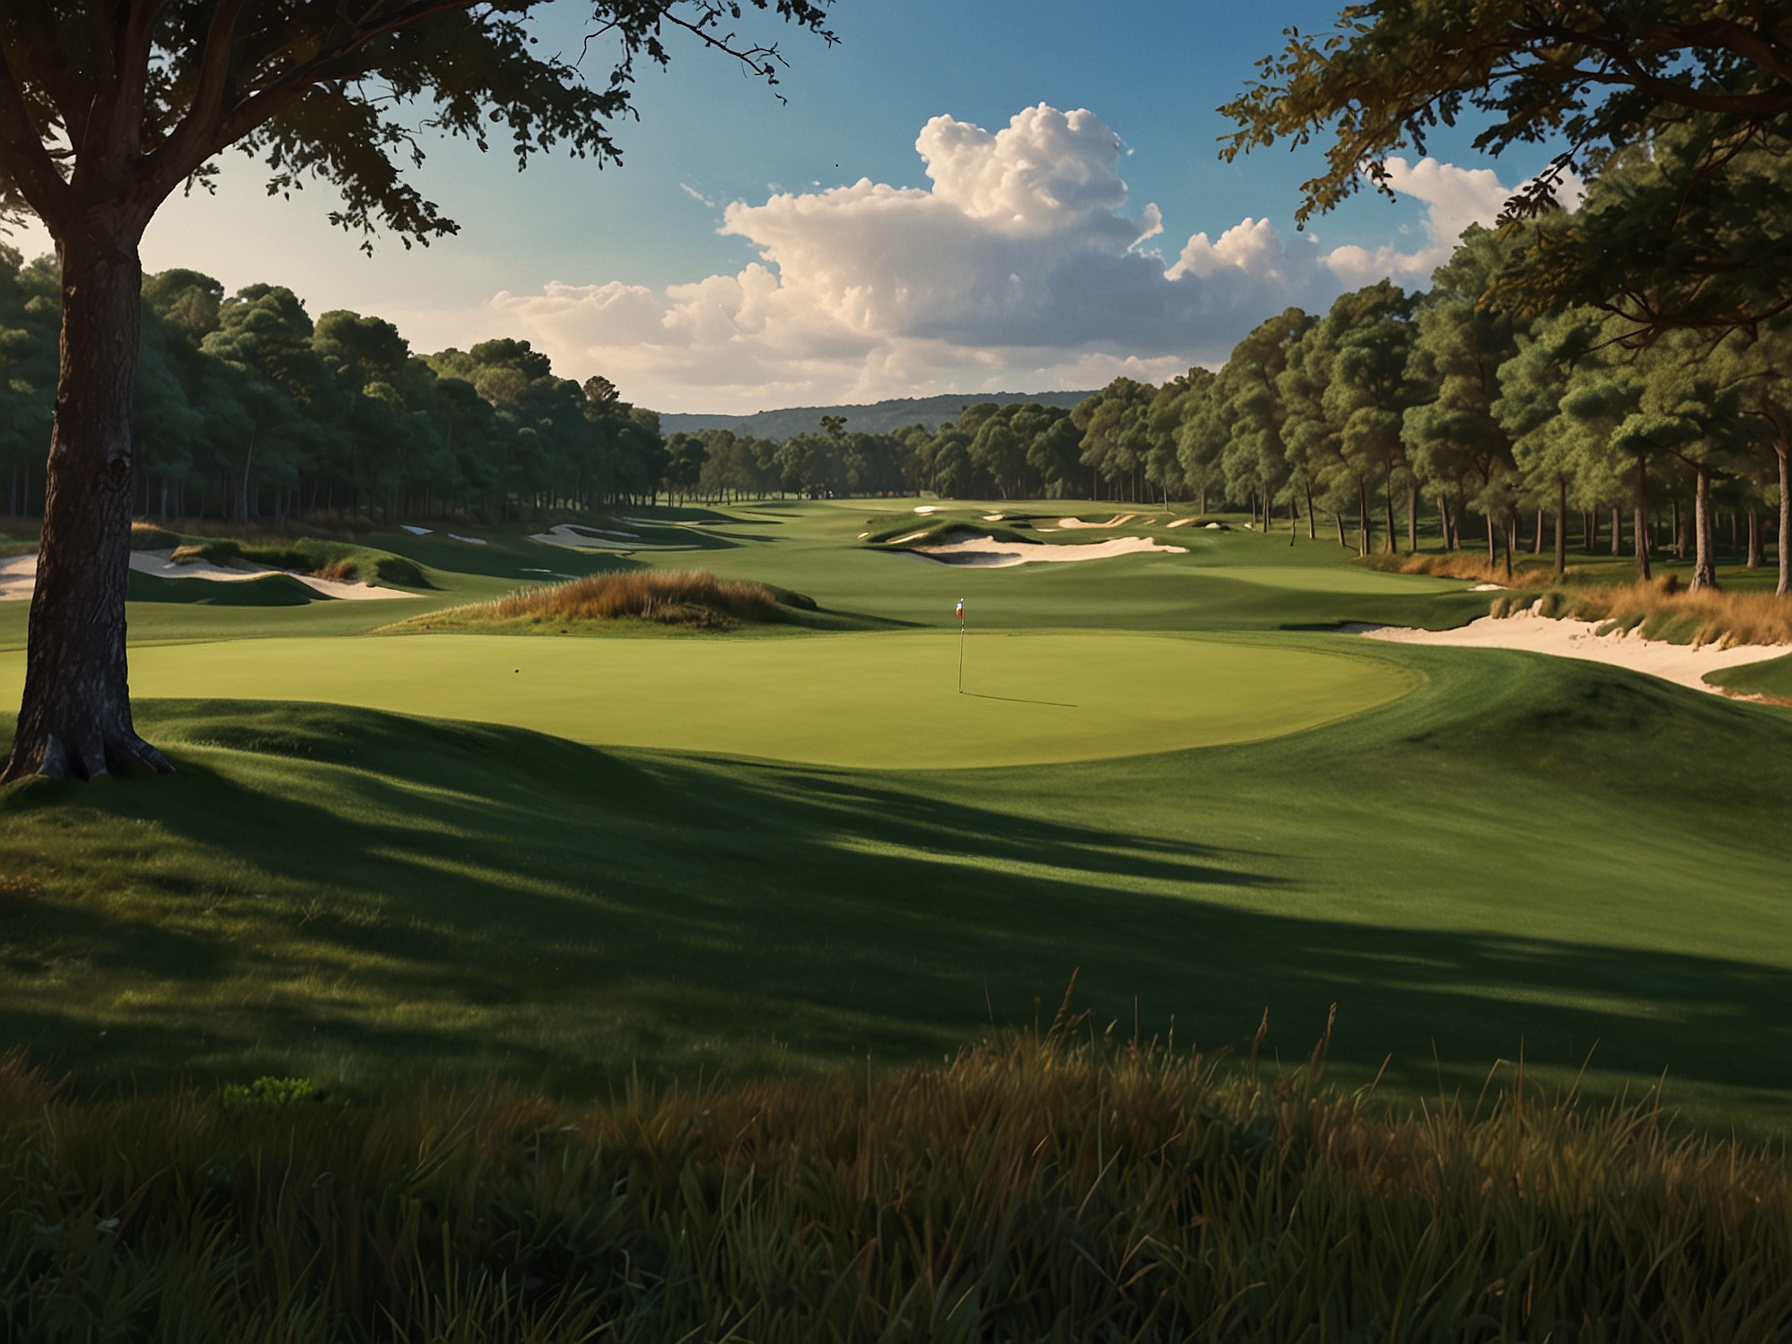 A view of the prestigious course where the Amateur Championship will be held, highlighting its challenging layout.